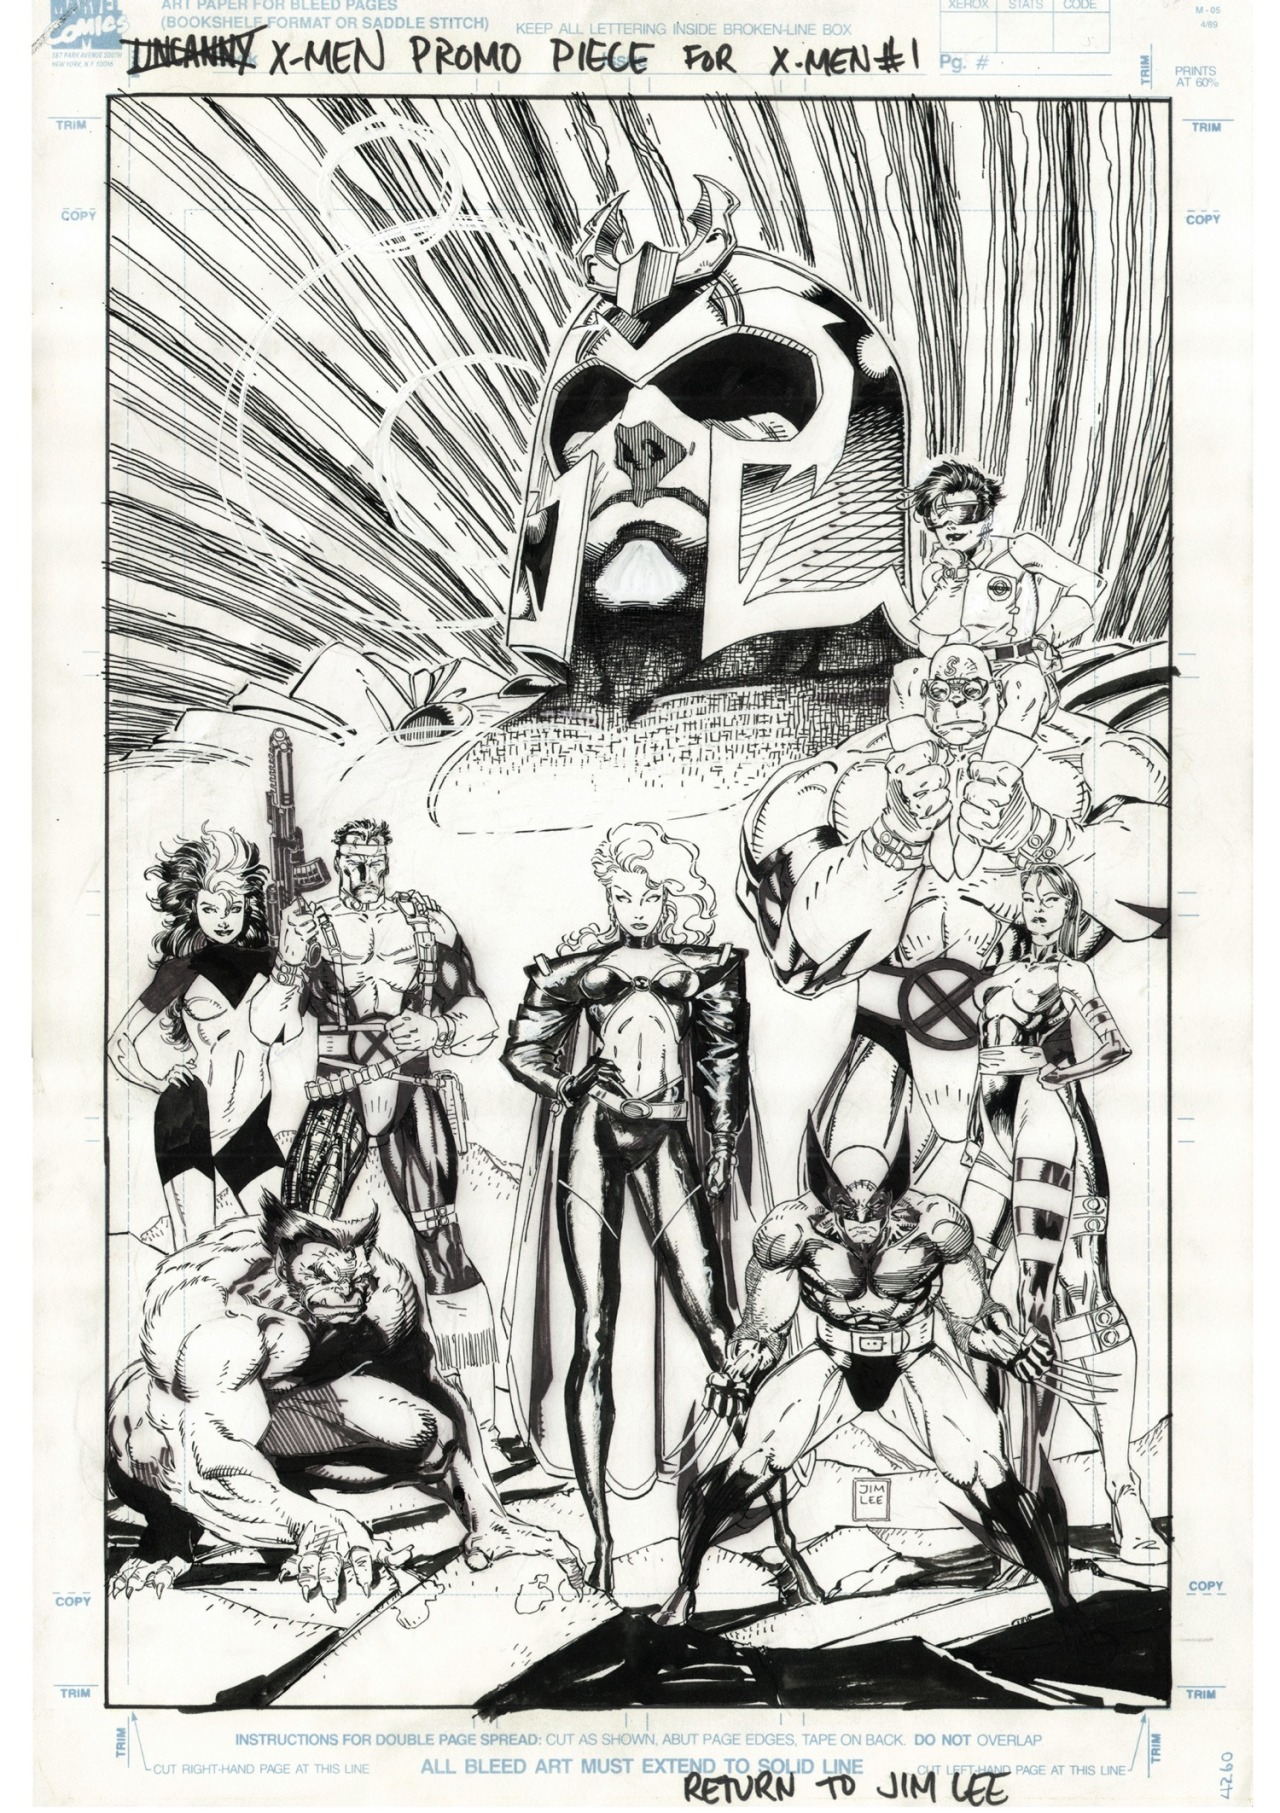 Fears Magazine — Jim Lee's X-Men Artist's Edition now available...